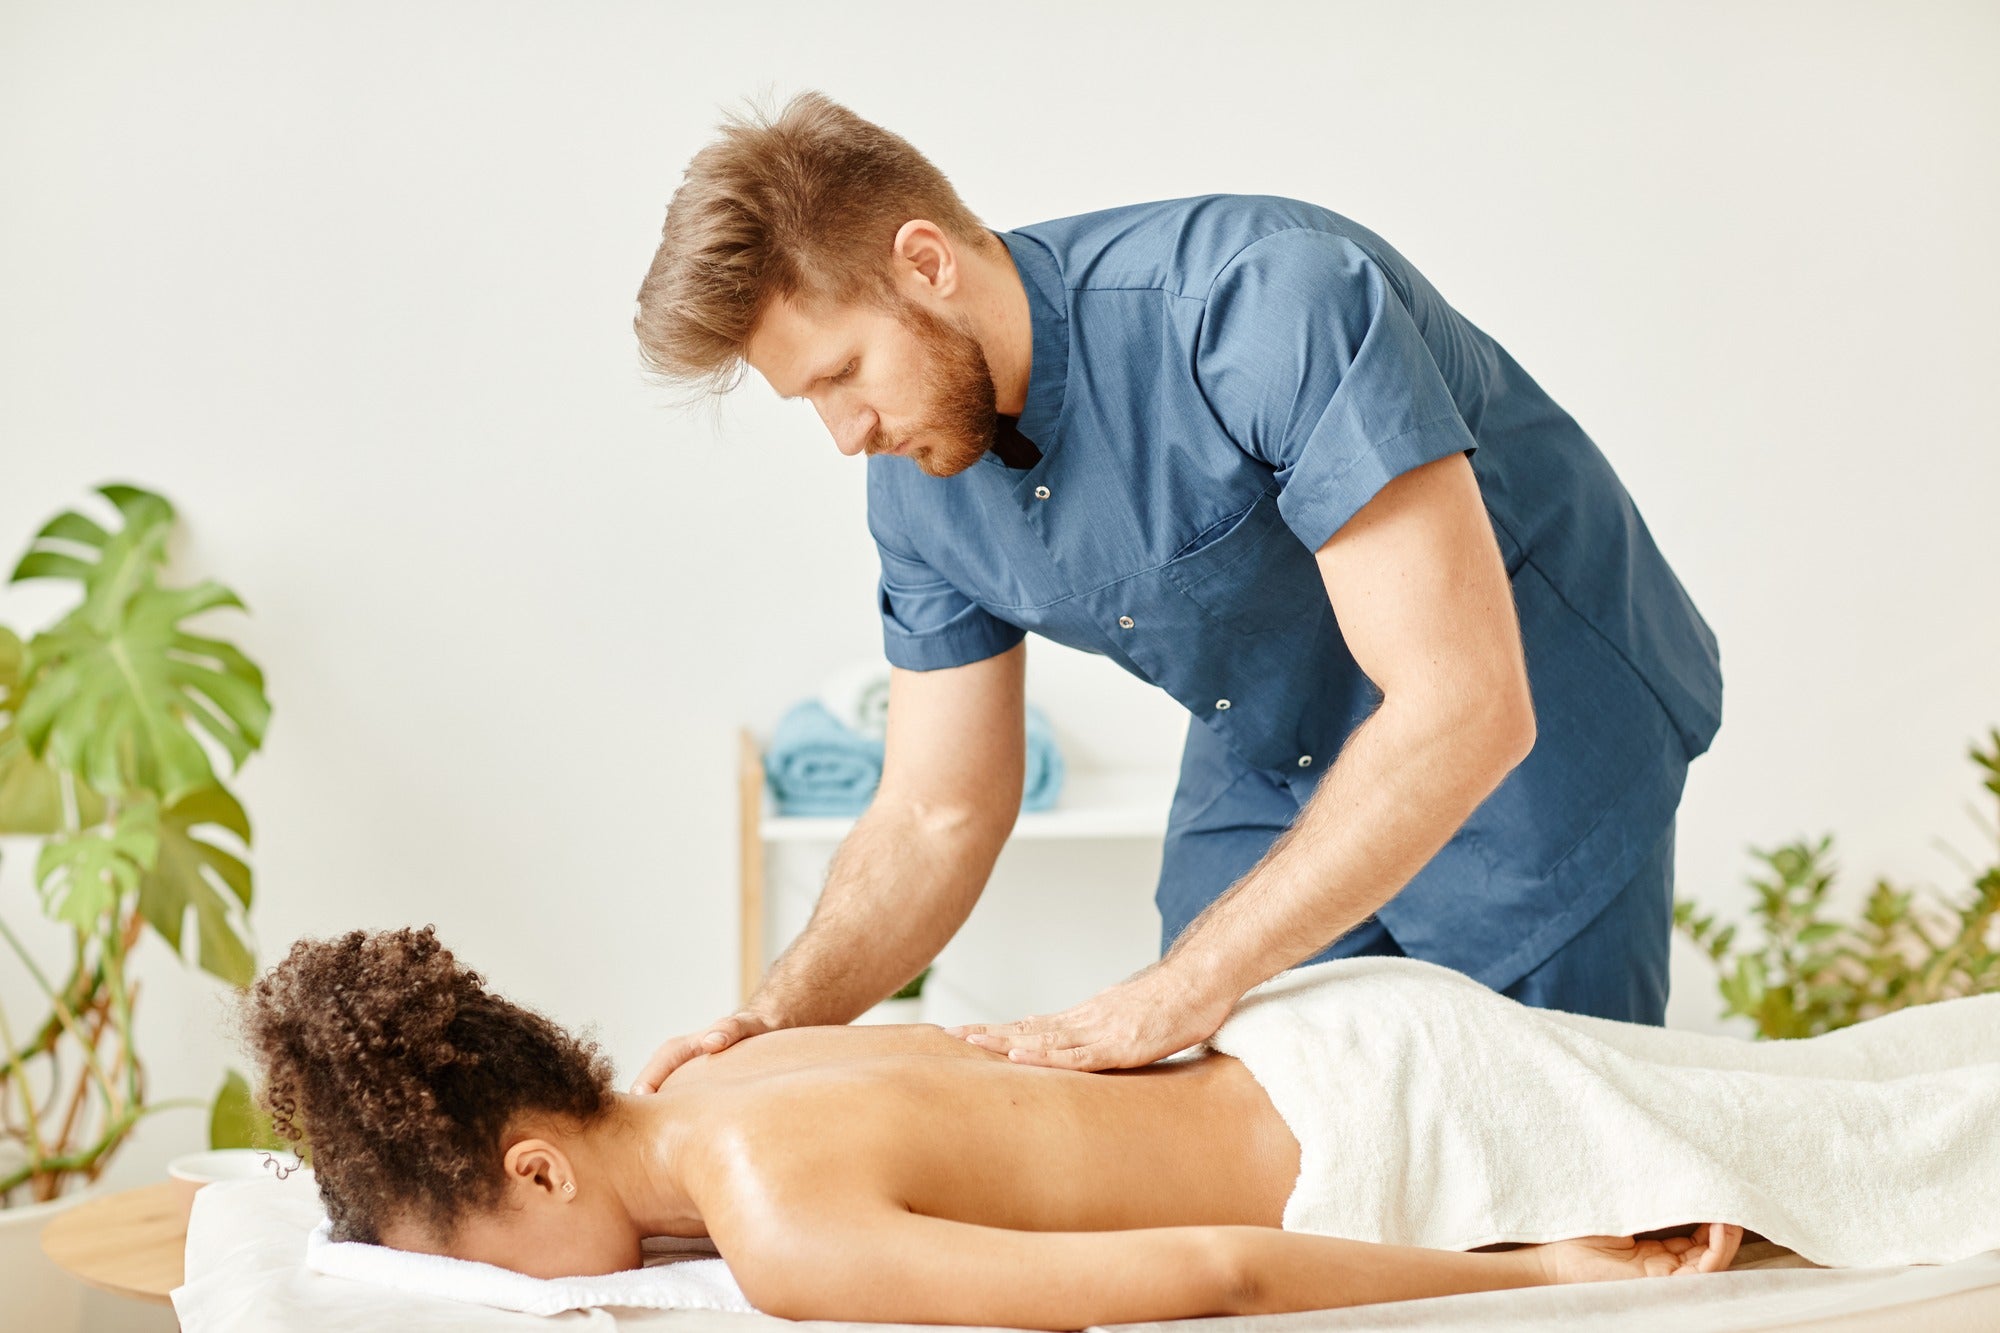 Home spa session: Woman enjoying a massage therapy at home to represent a massage therapist carreer